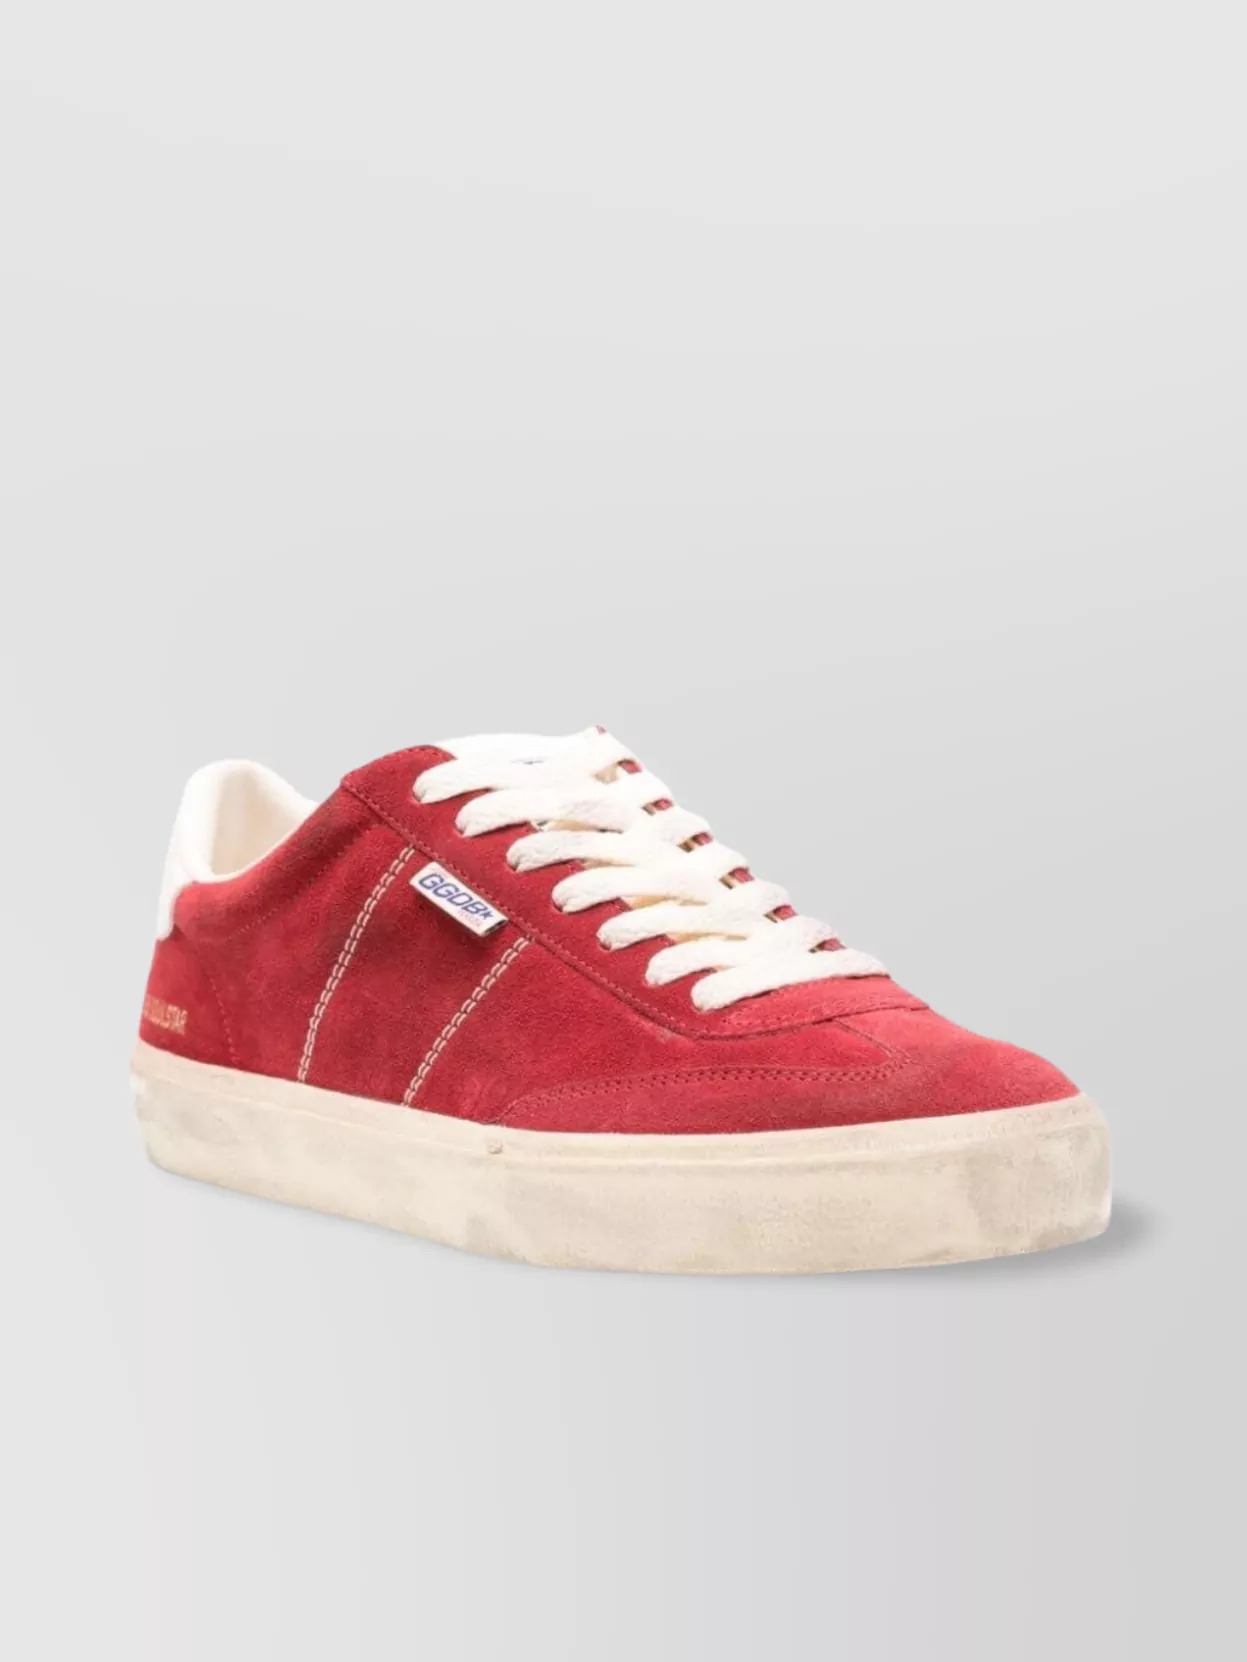 Golden Goose Low Top Sneakers Distressed Finish In Red